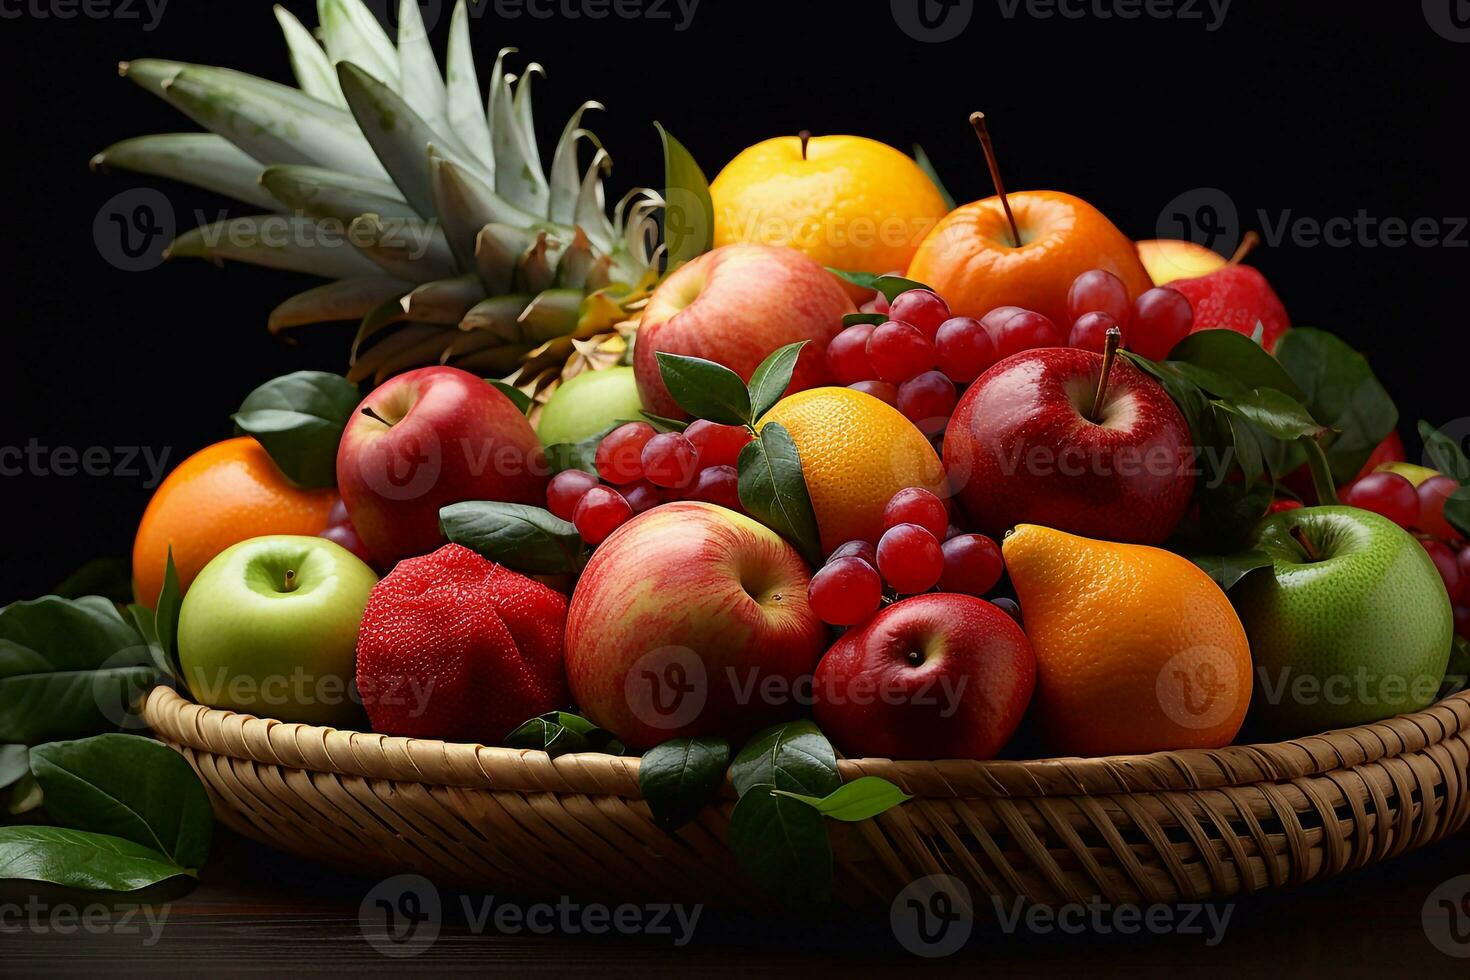 Flavorful Canvas Closeup Image of Fruits in Basket Created with Generative AI's Expertise photo